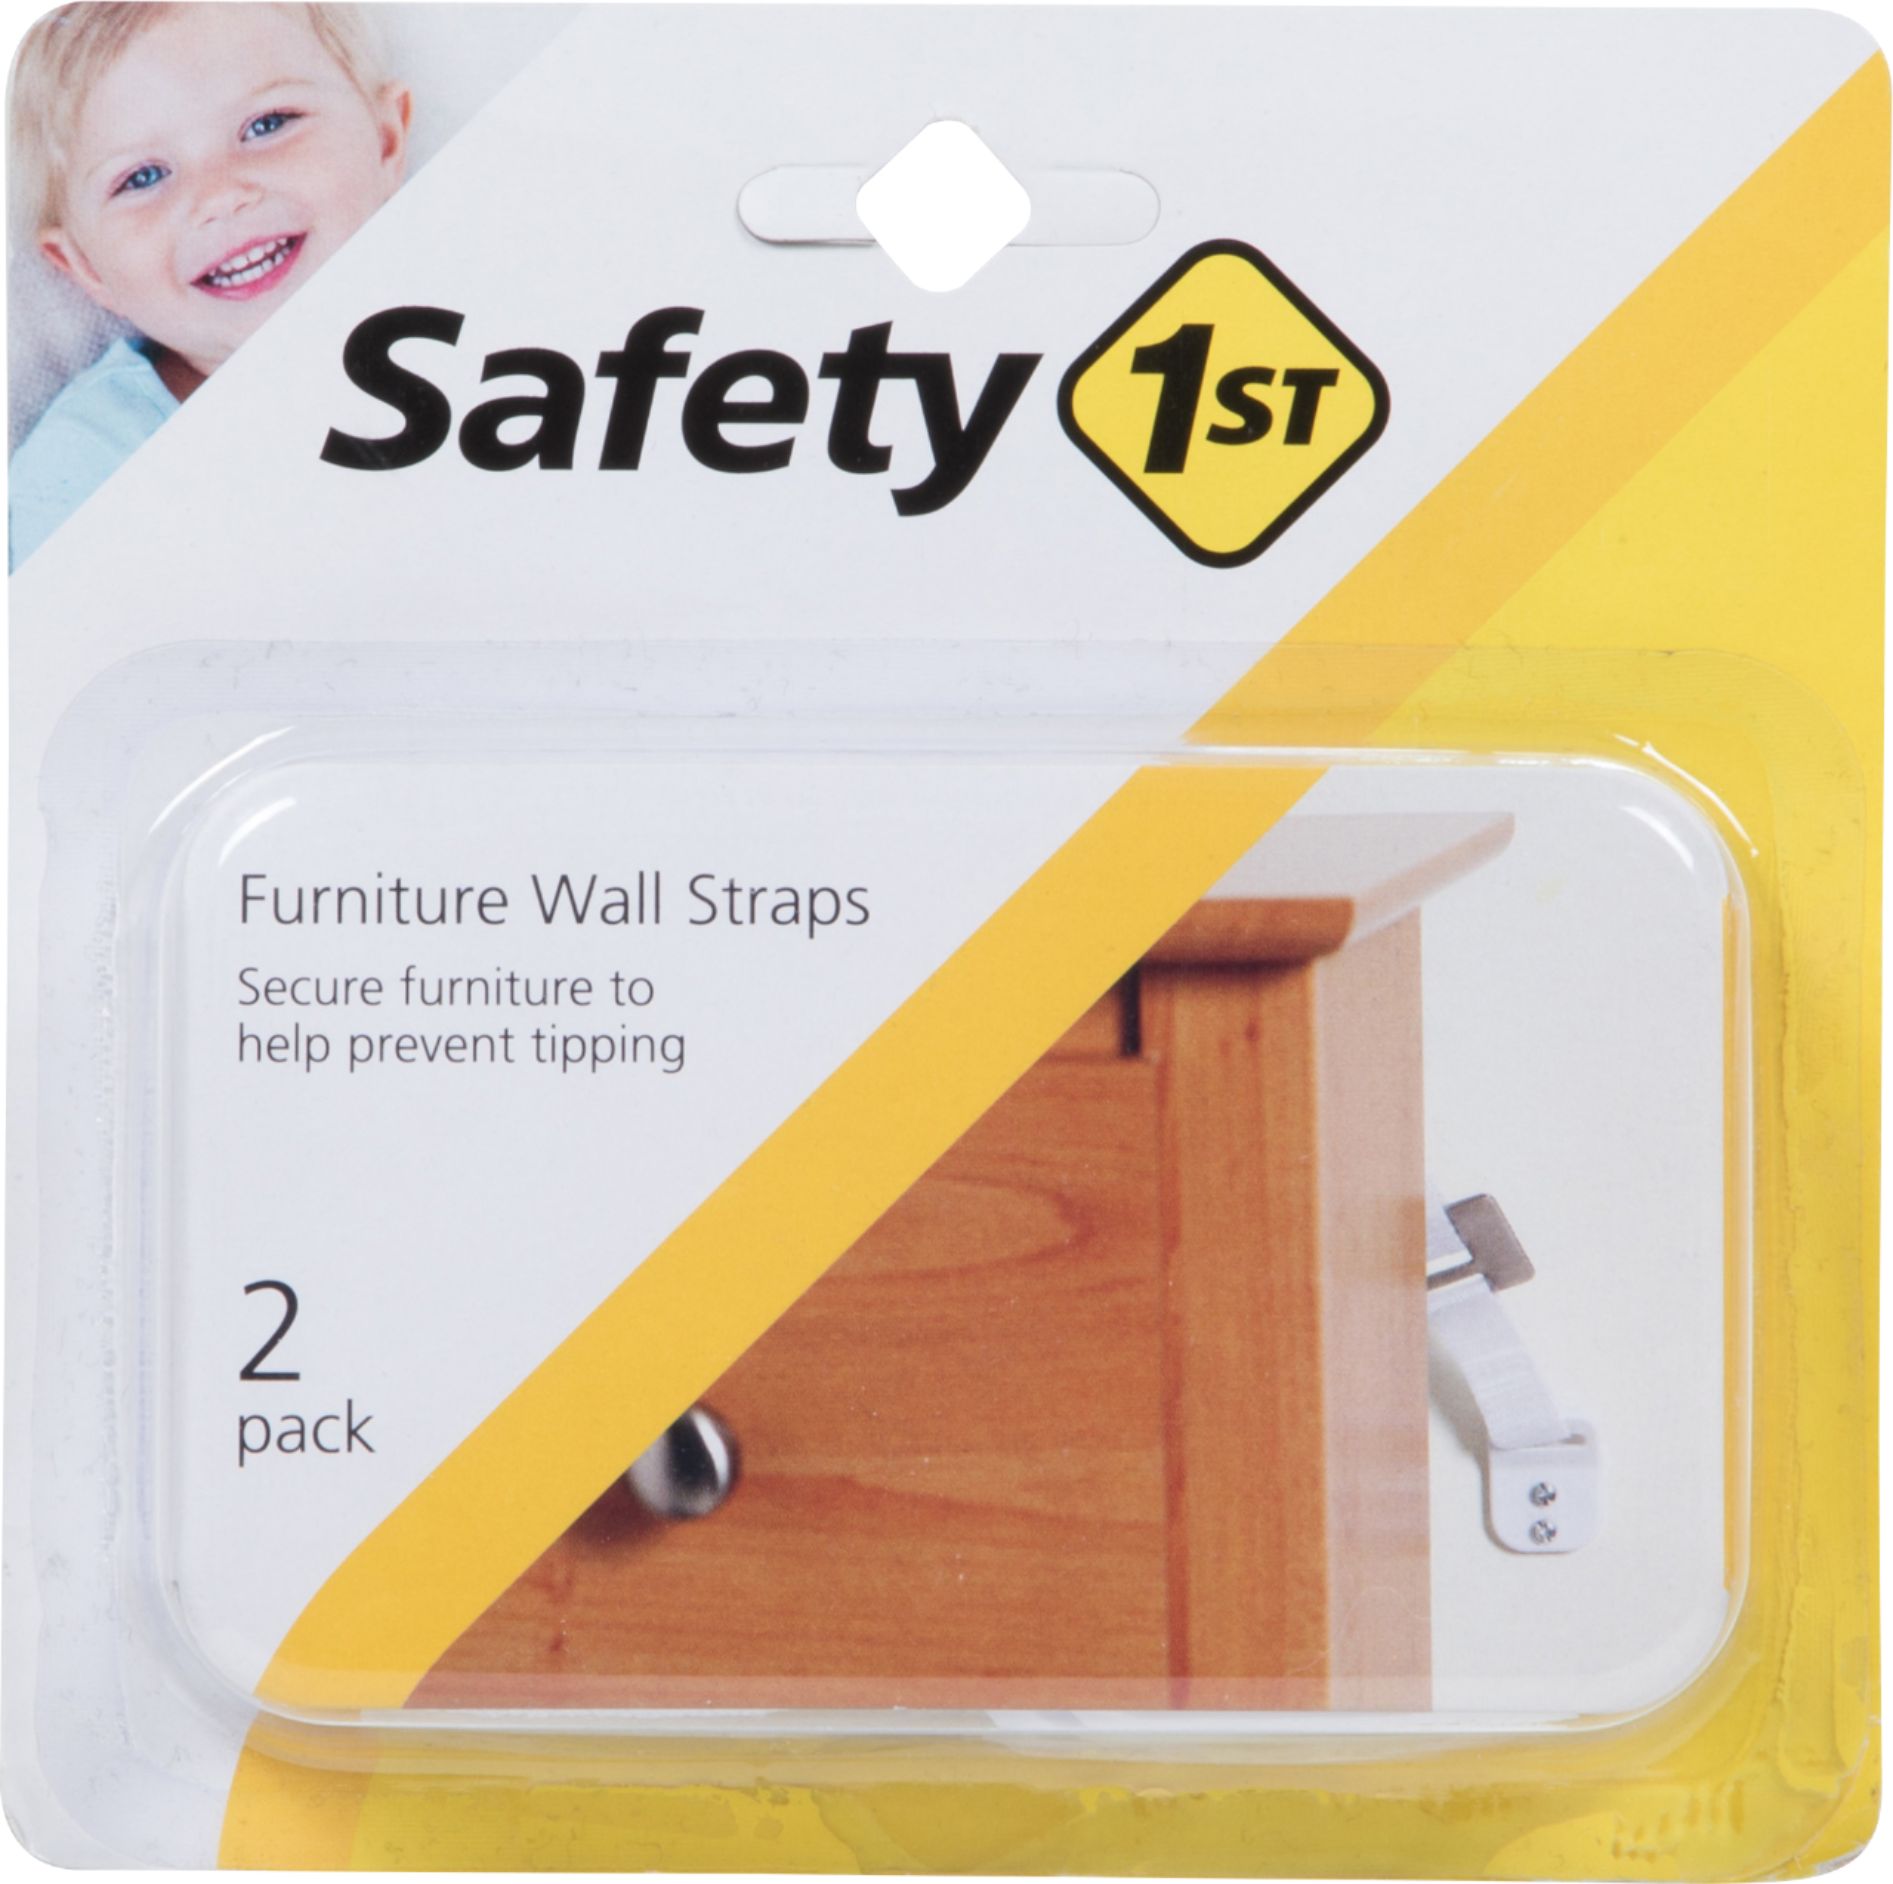 Safety 1st - Furniture Wall Straps - White